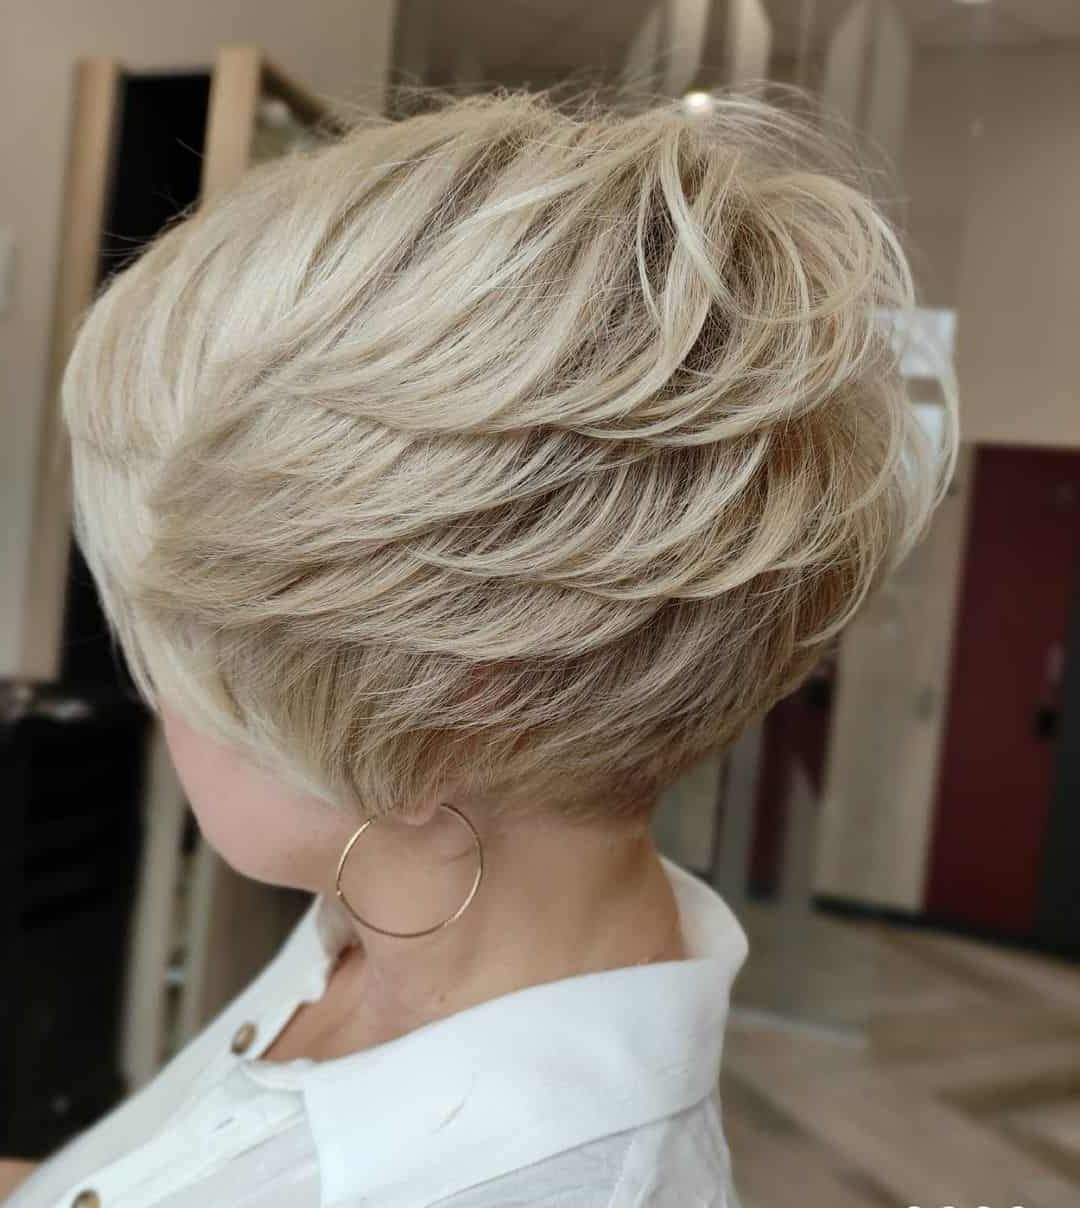 The 34 Cutest Pixie Bob Haircut Ideas Ever Throughout Layered Messy Pixie Bob Hairstyles (View 13 of 20)